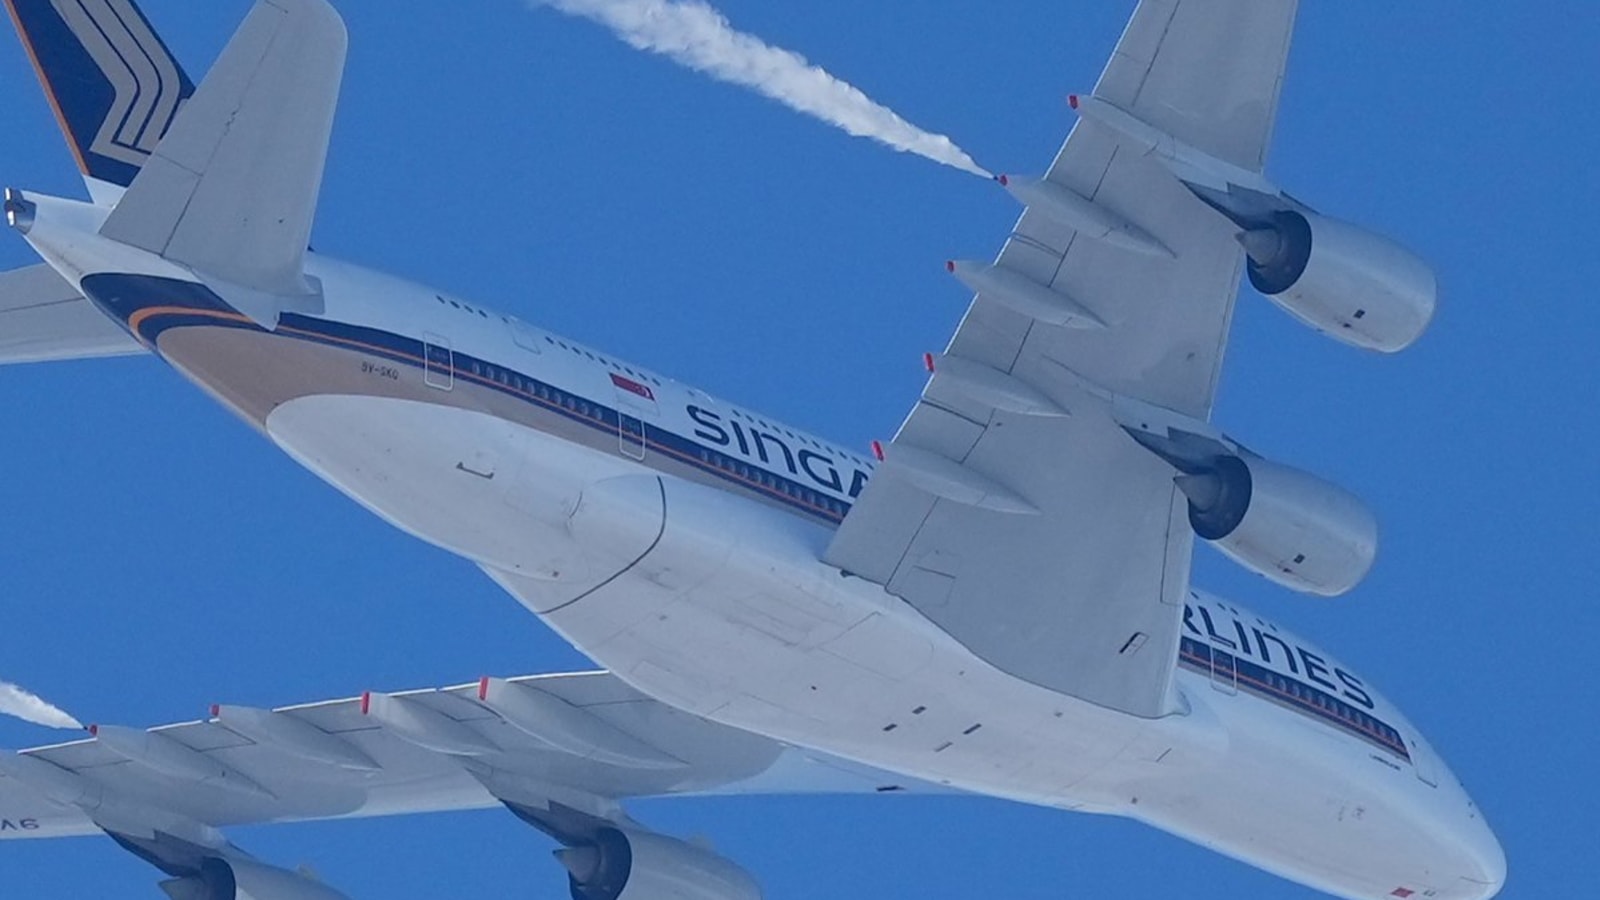 Singapore Airlines flight from London diverted to Frankfurt due to issue with cabin pressure